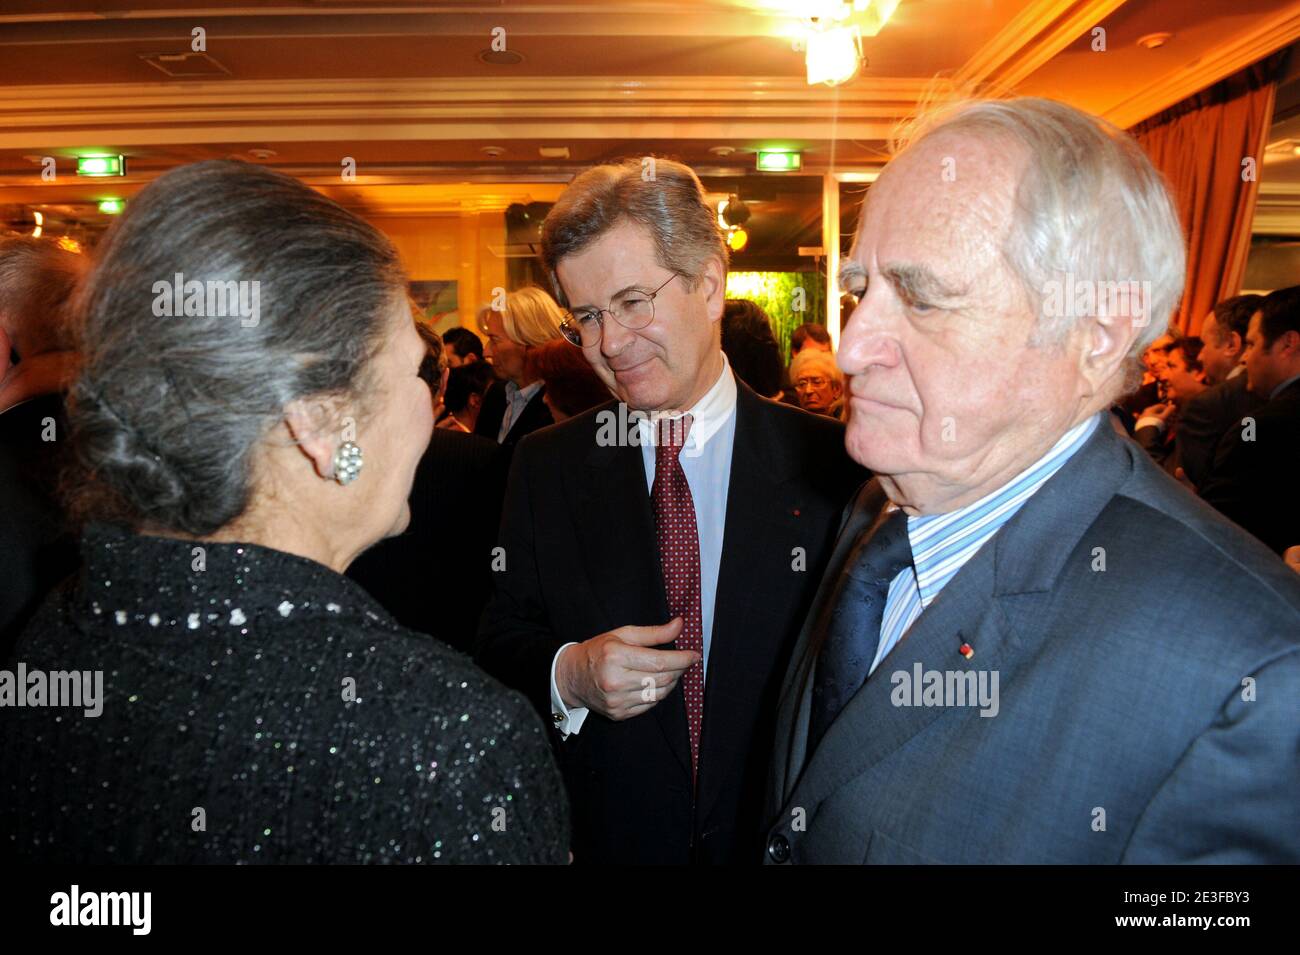 Jean-David Levitte (C), Simone Veil and husband Antoine Veil attend the 'Crif' (French Jewish community representative council) annual dinner, held at Pavillon d'Armenonville, in Paris, France on March 2, 2009. Photo by Ammar Abd Rabbo/ABACAPRESS.COM Stock Photo